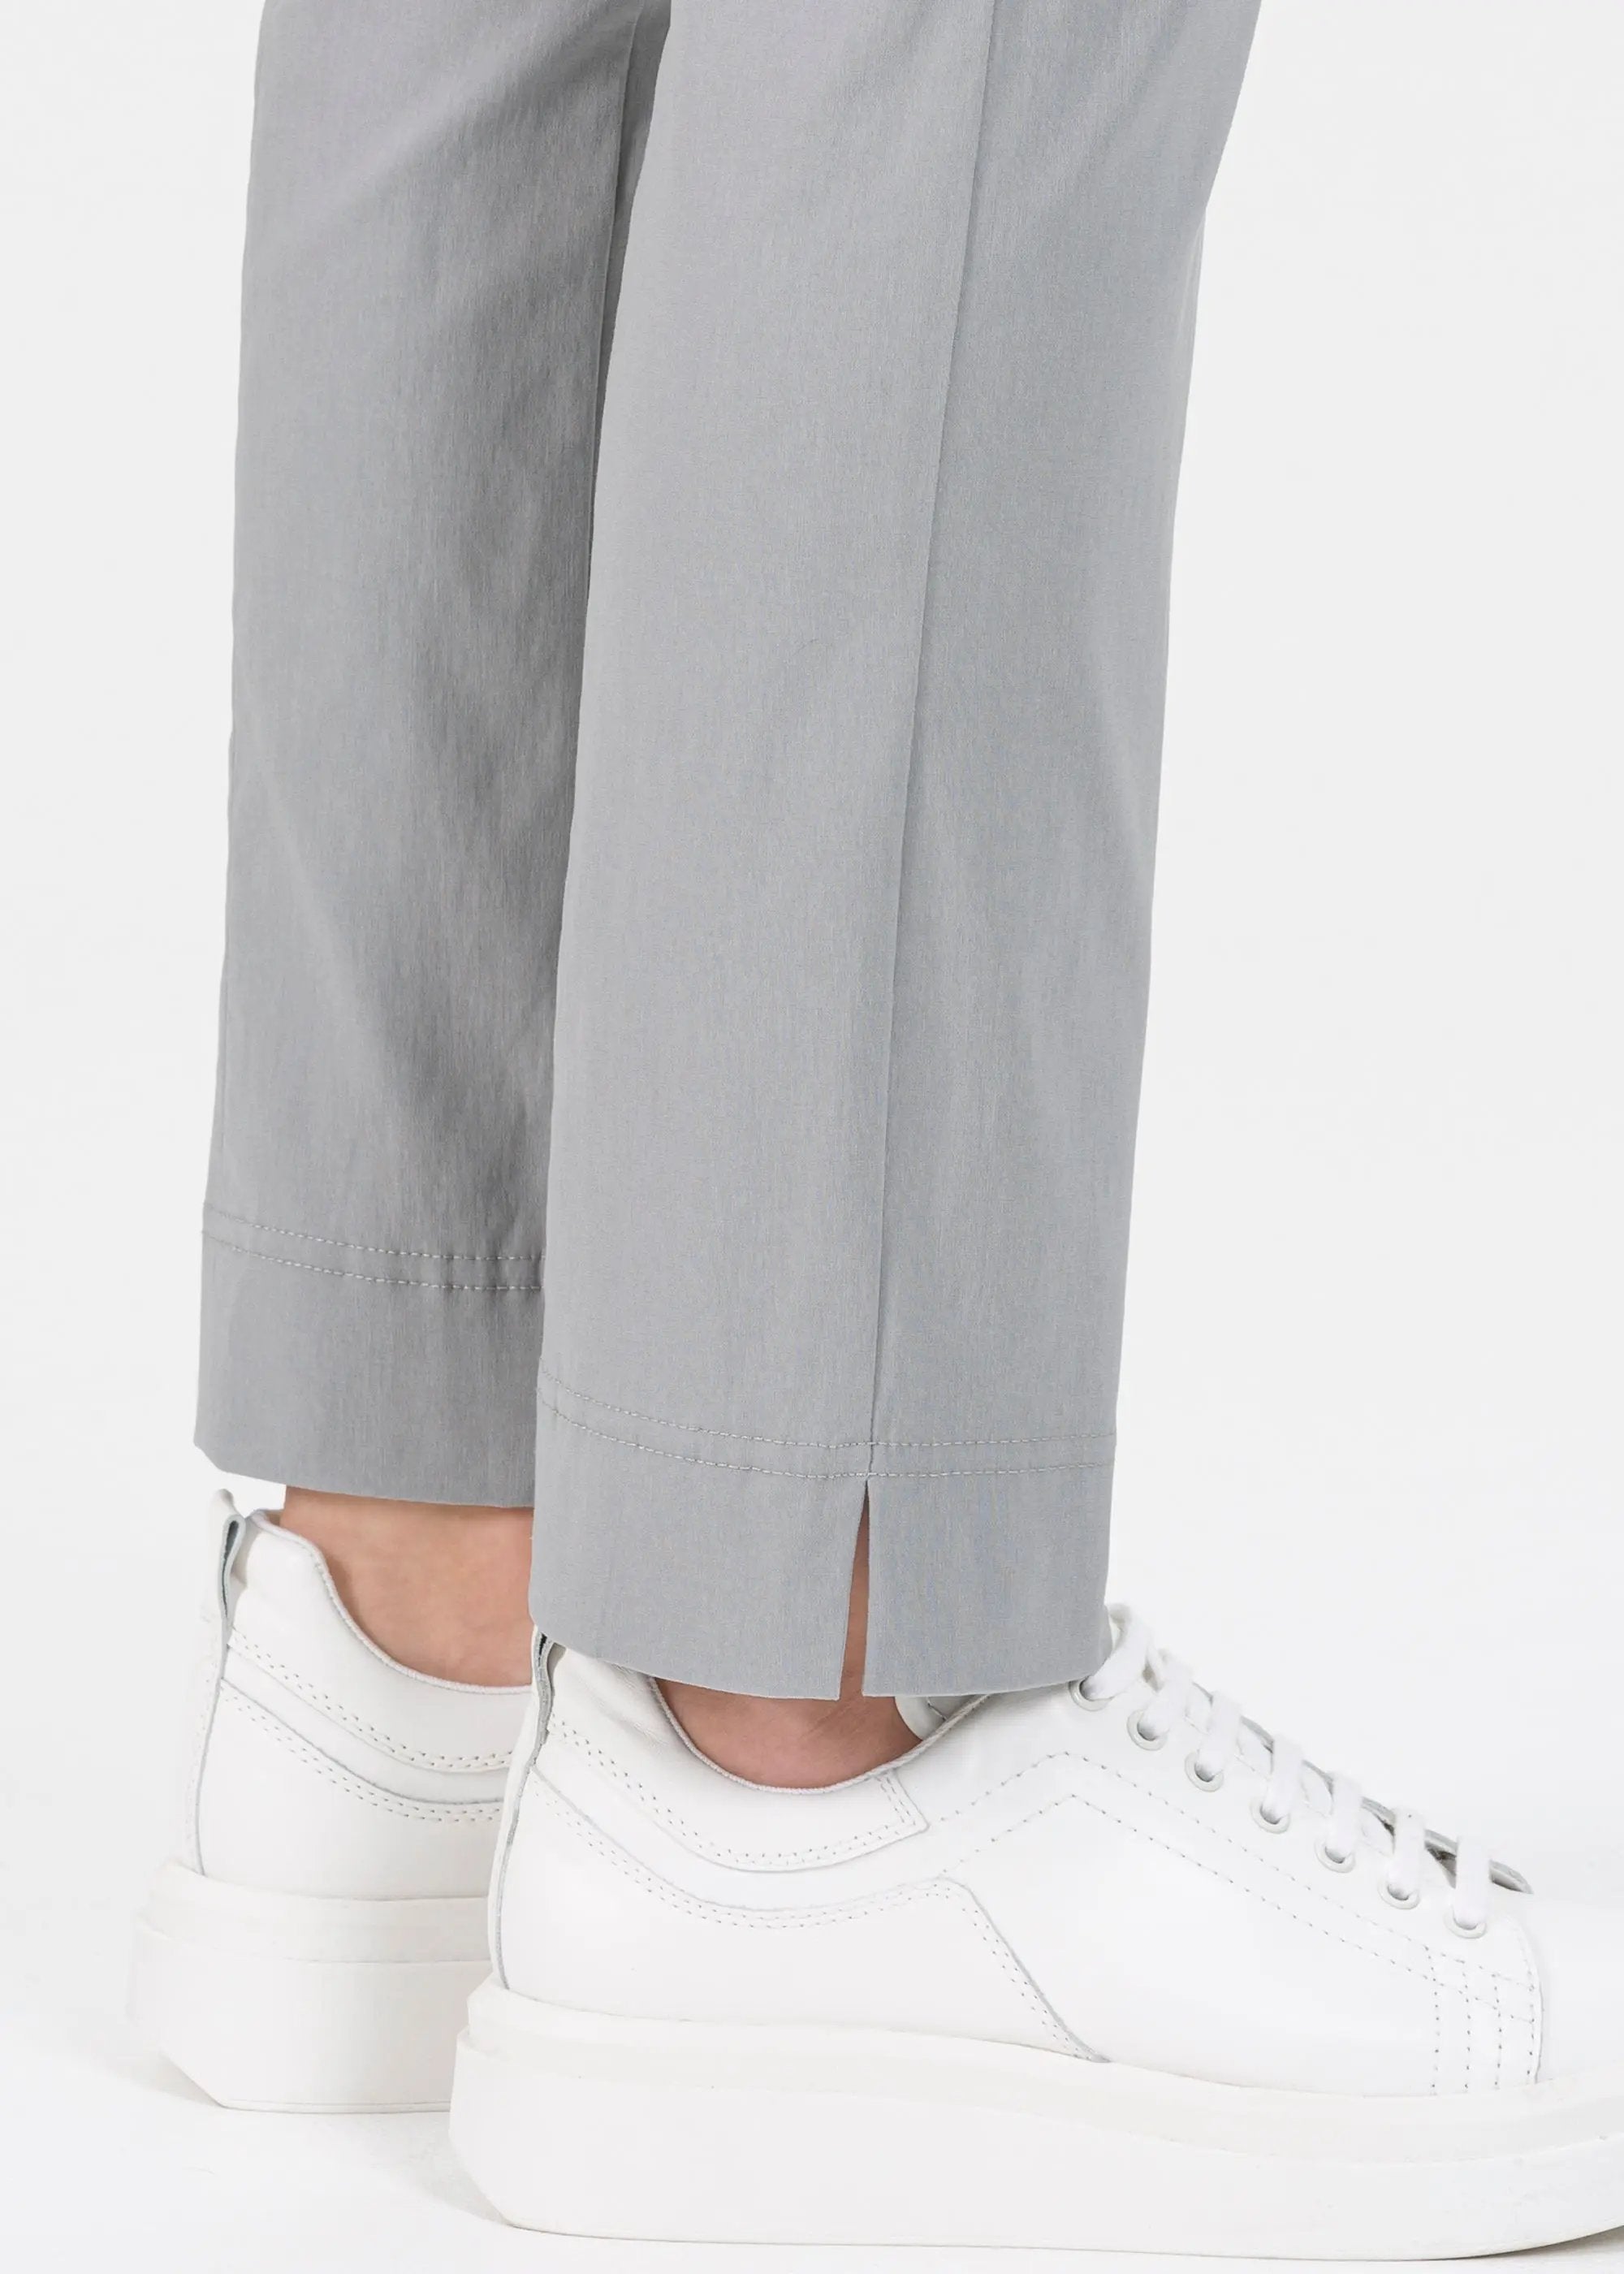 length trousers in Ina silver stretch ankle